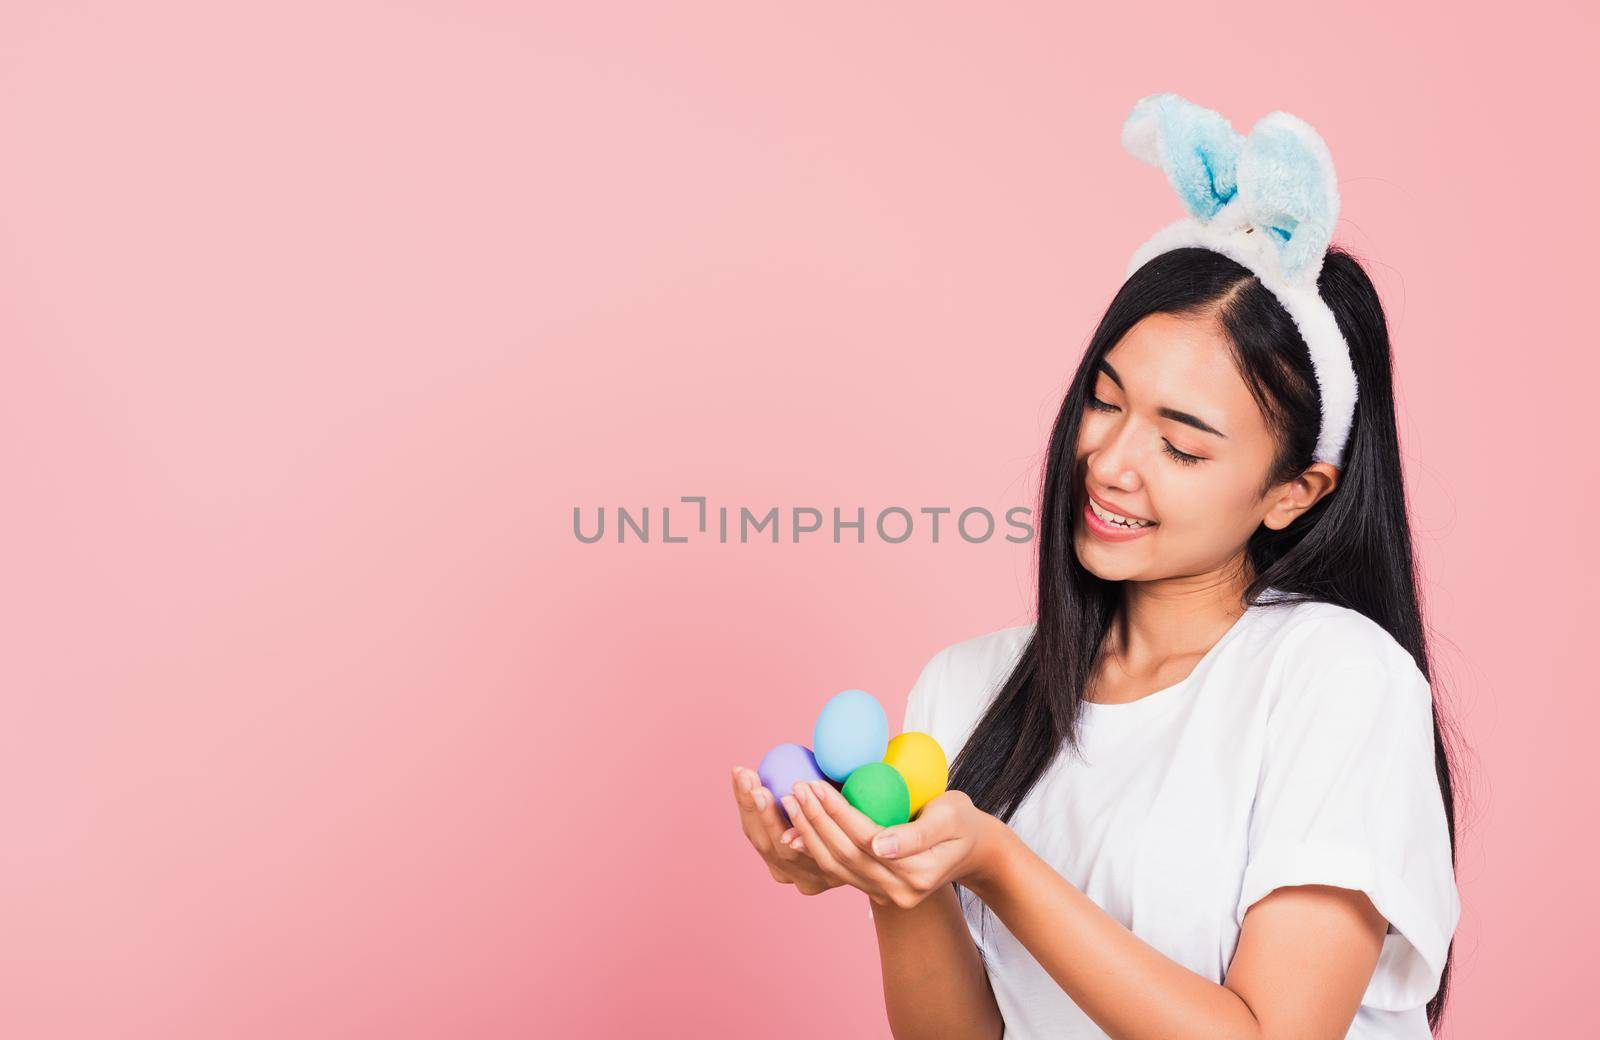 woman smiling wearing rabbit ears holding colorful Easter eggs gift on hands by Sorapop